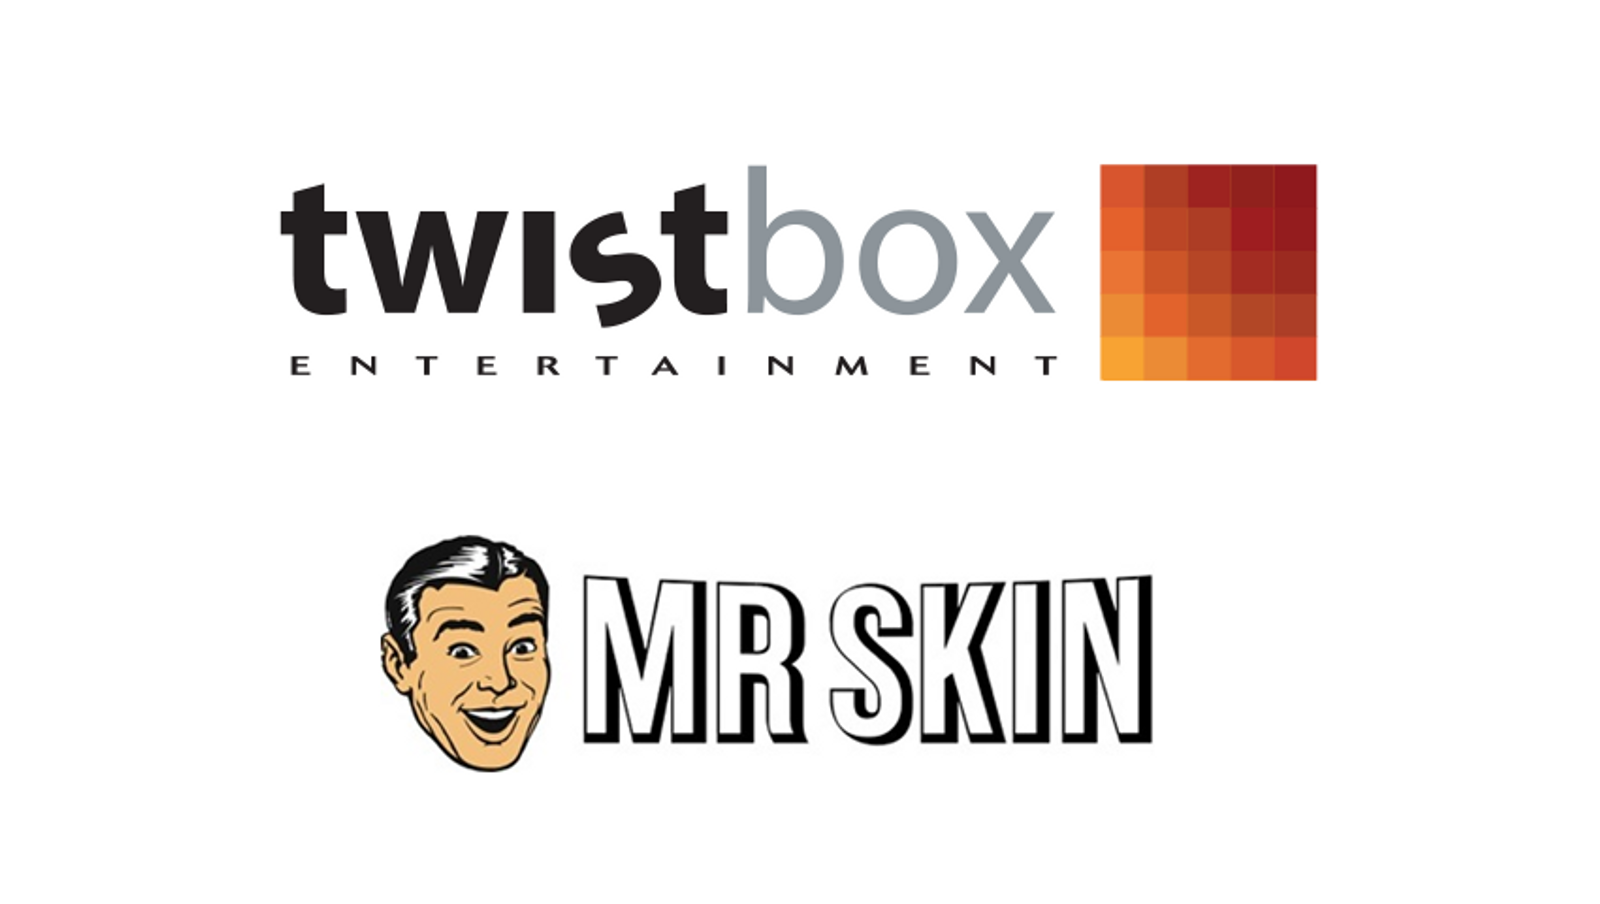 Twistbox, MrSkin Join Forces for Online Distribution in Europe